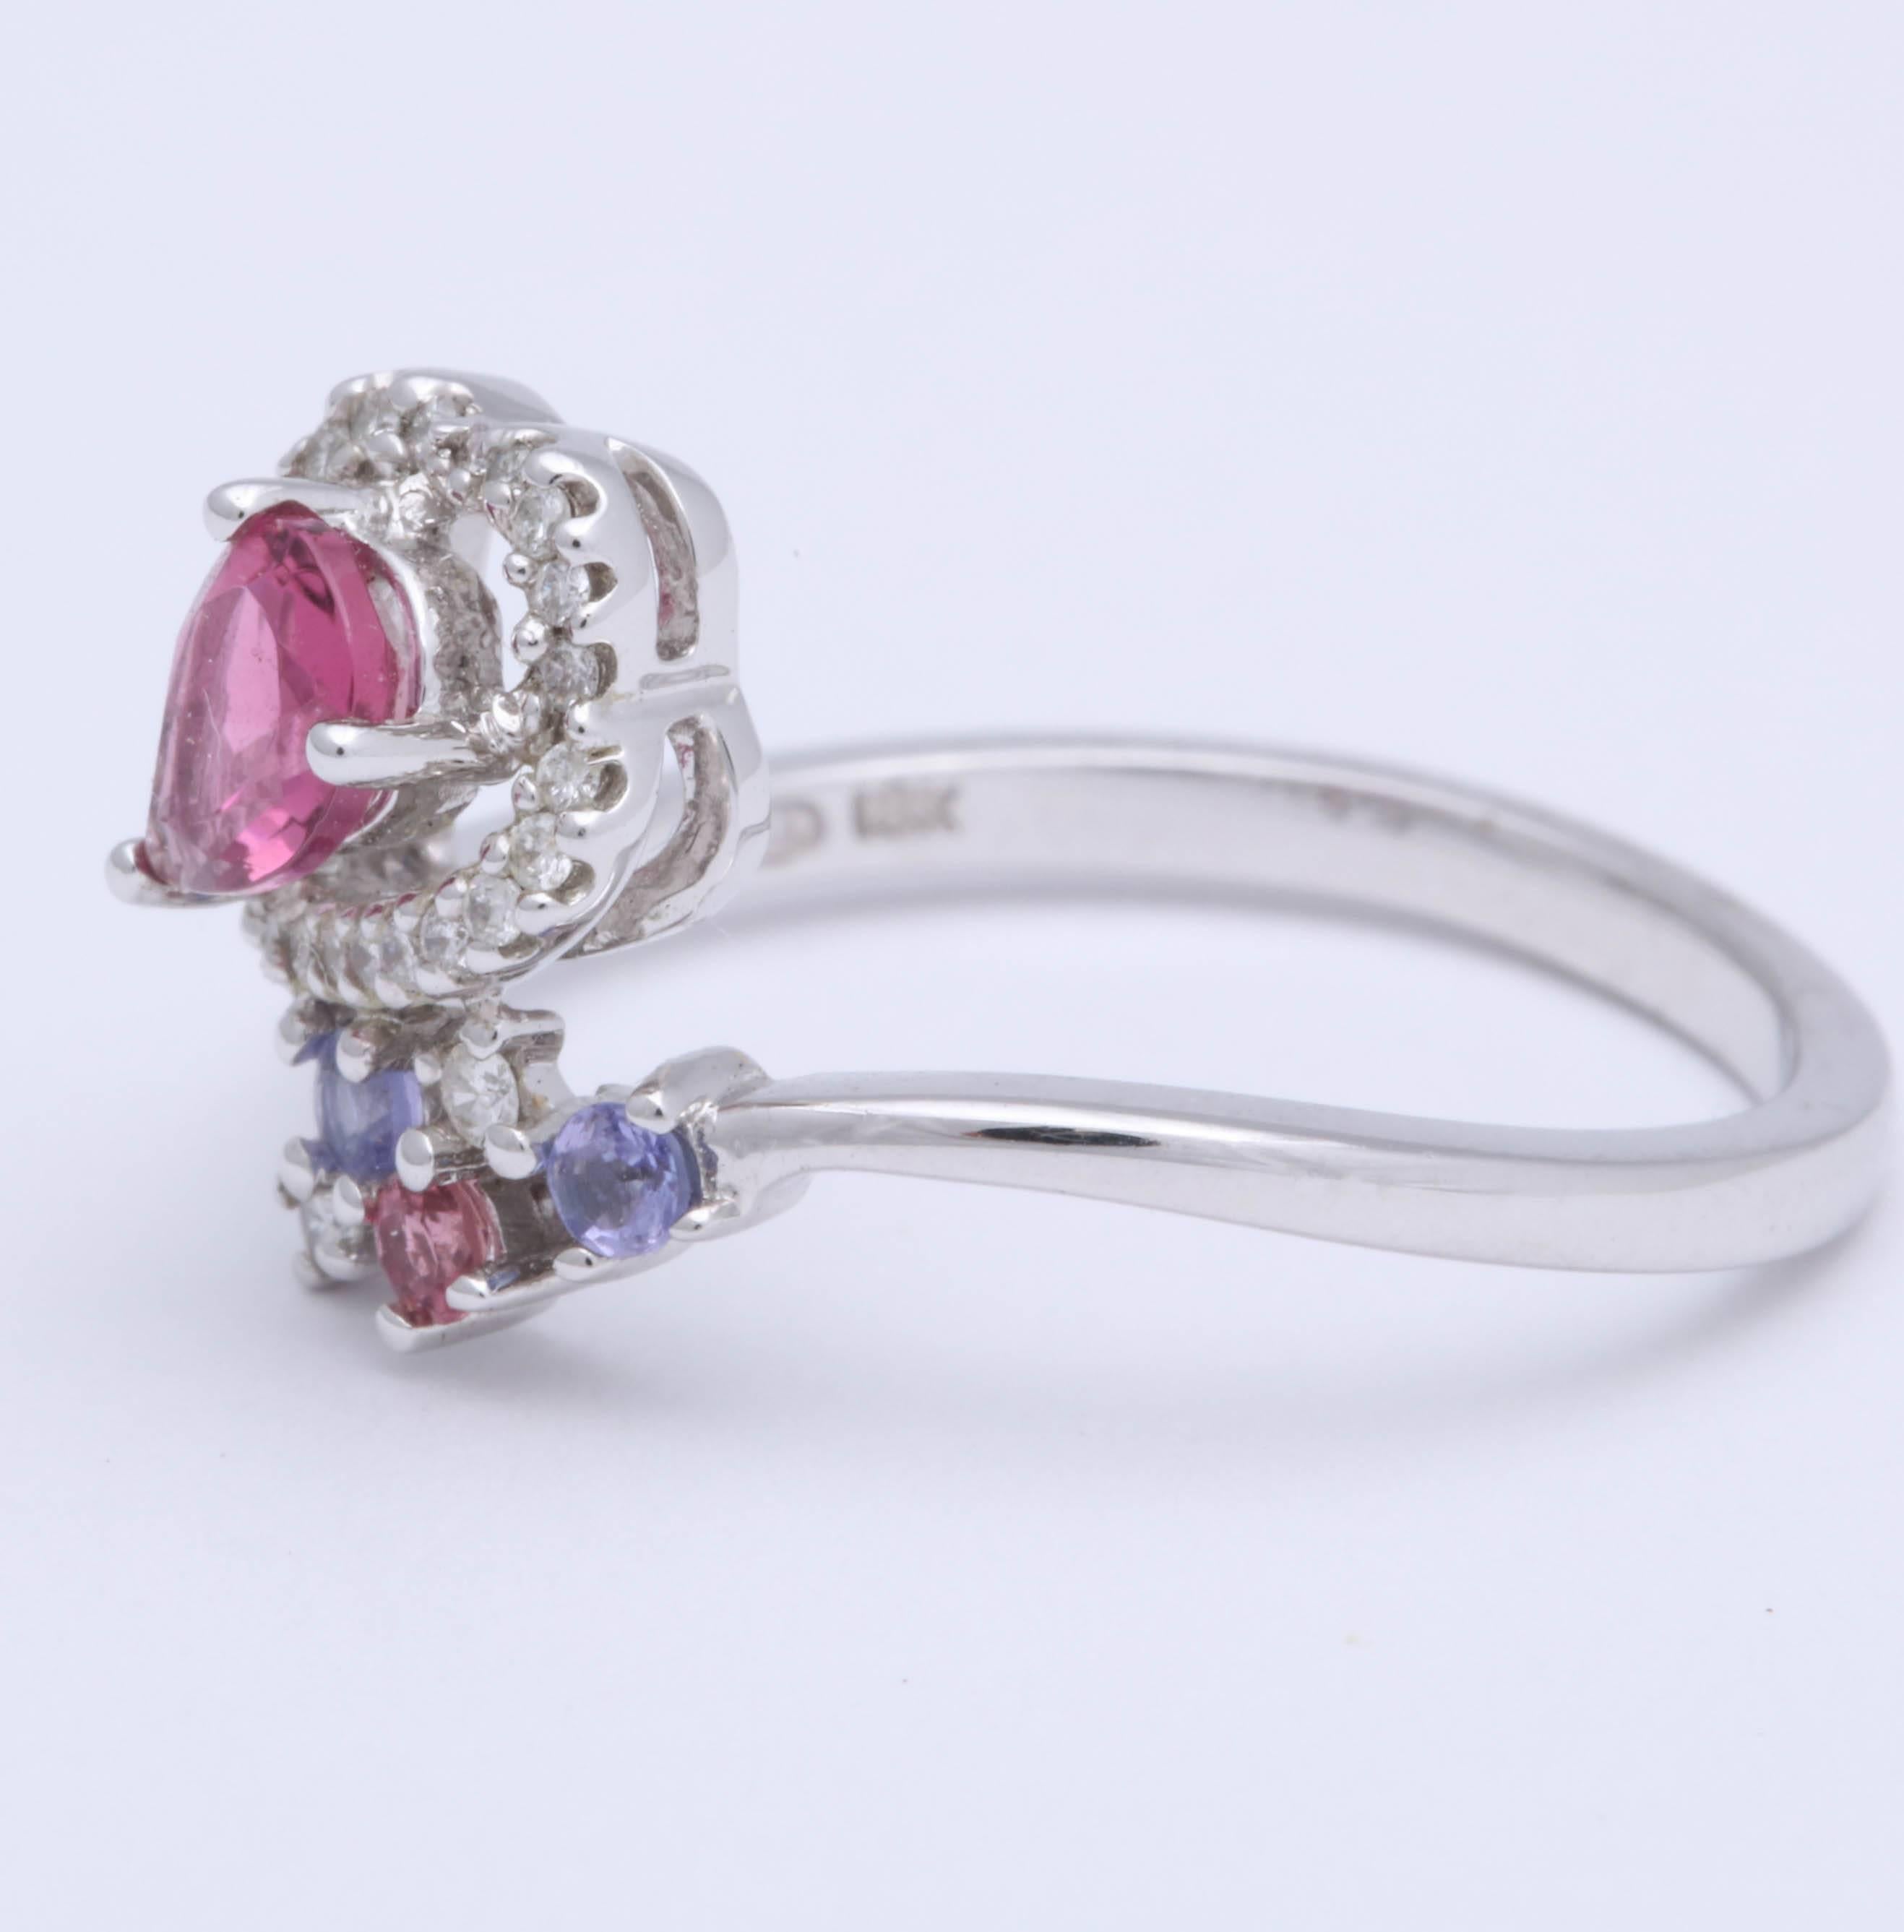 Sweet and stylish pear shape pink tourmaline ring in 18 kt white gold. The tourmaline is enhanced by periwinkle colored round tanzanite and a pink sapphire. A row of diamonds surrounds the center stone, total diamond weight is about .26 cts. The